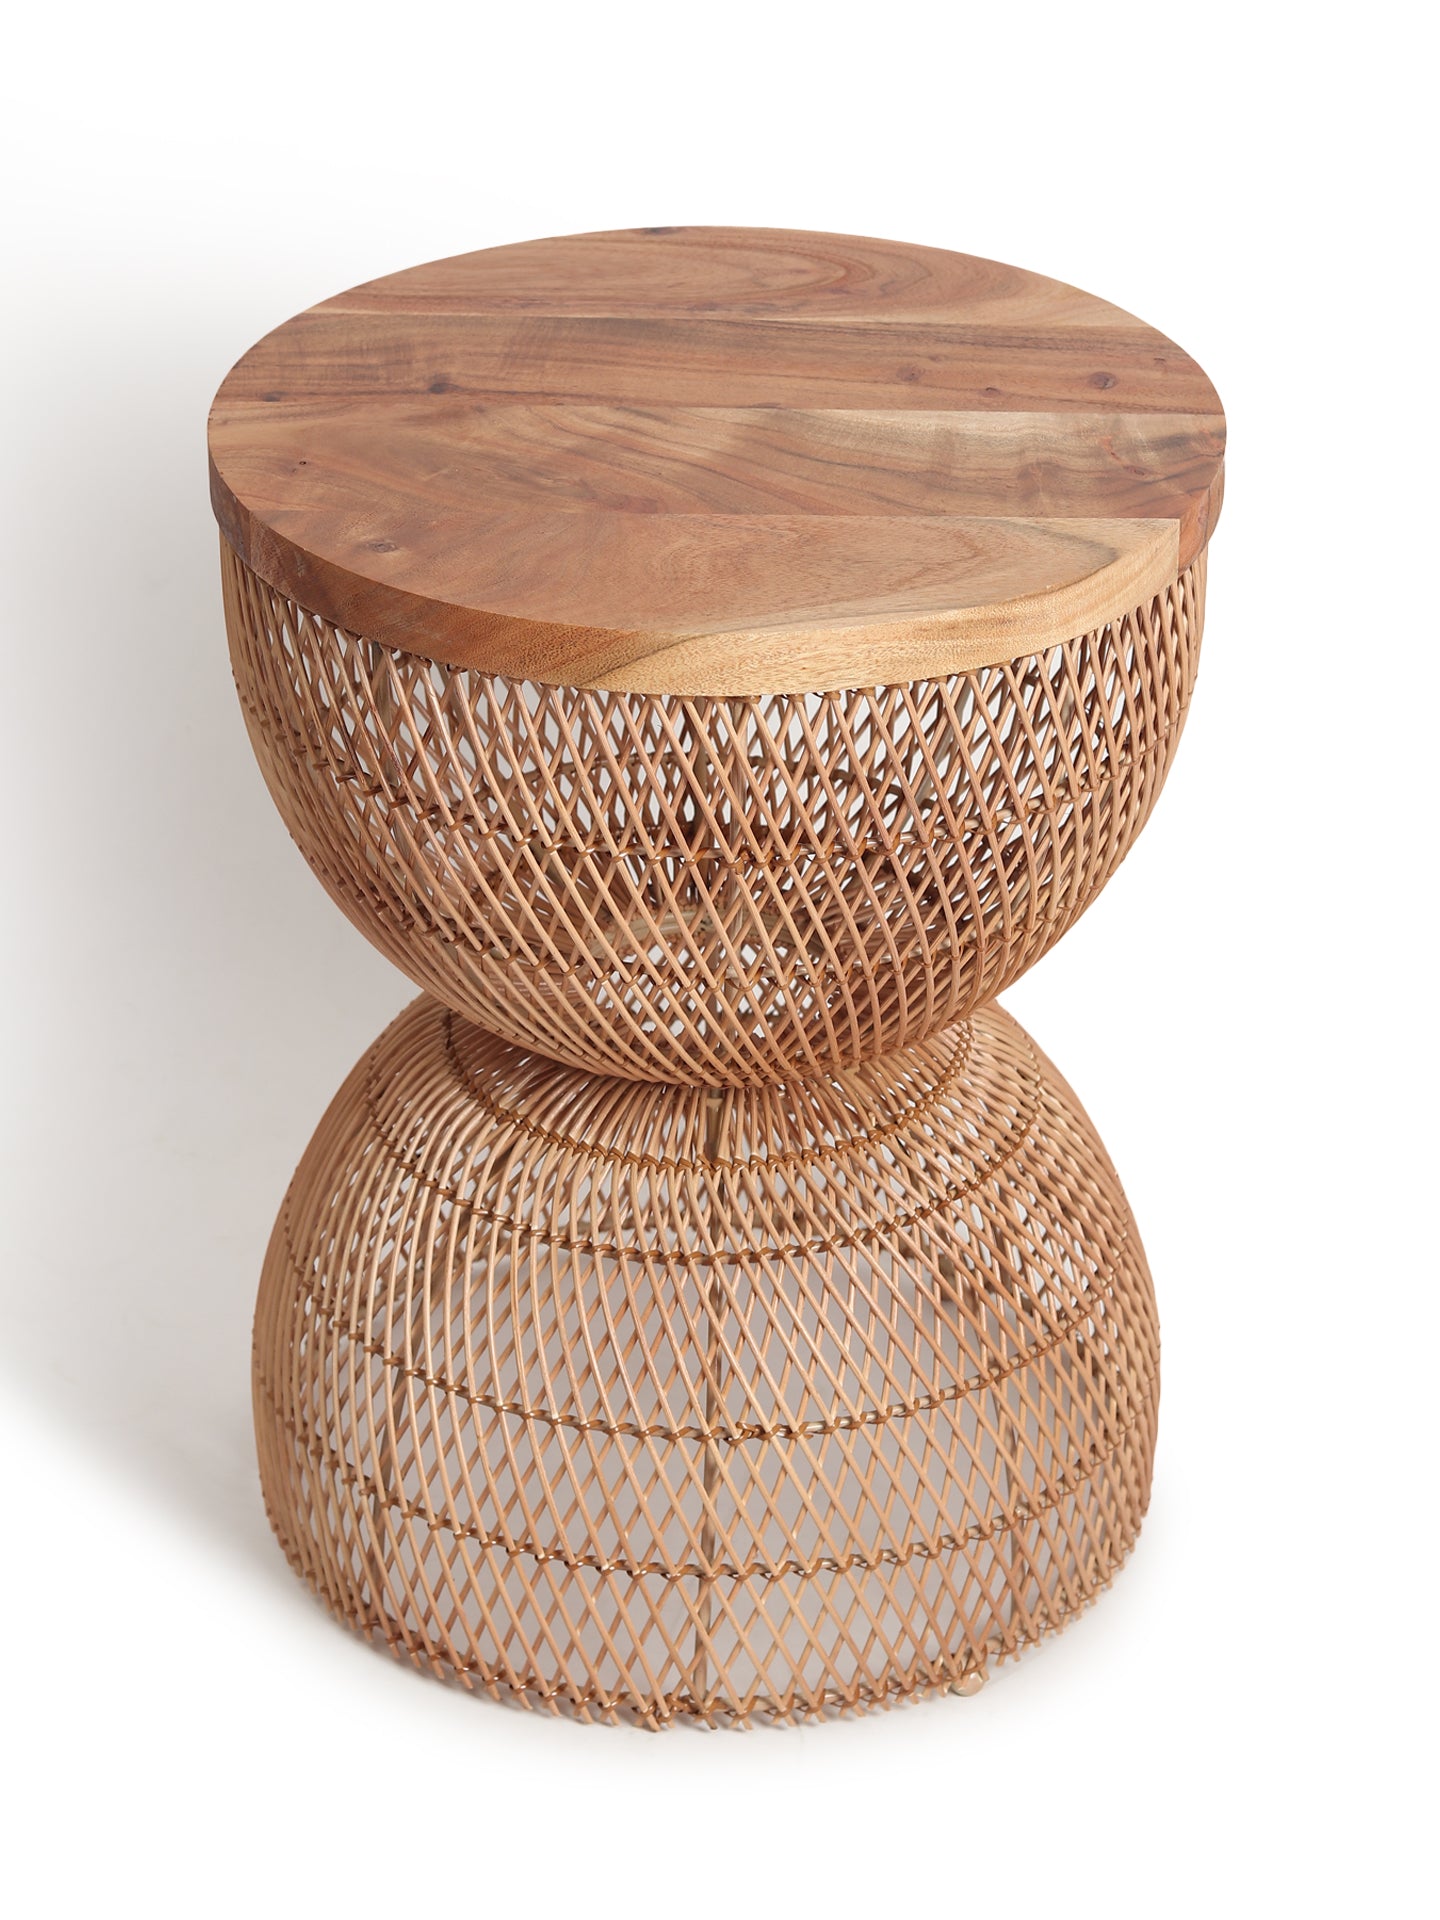 Wooden Rattan Stool | Mini Side Stool | Cane Round Table | Stylish Side Table